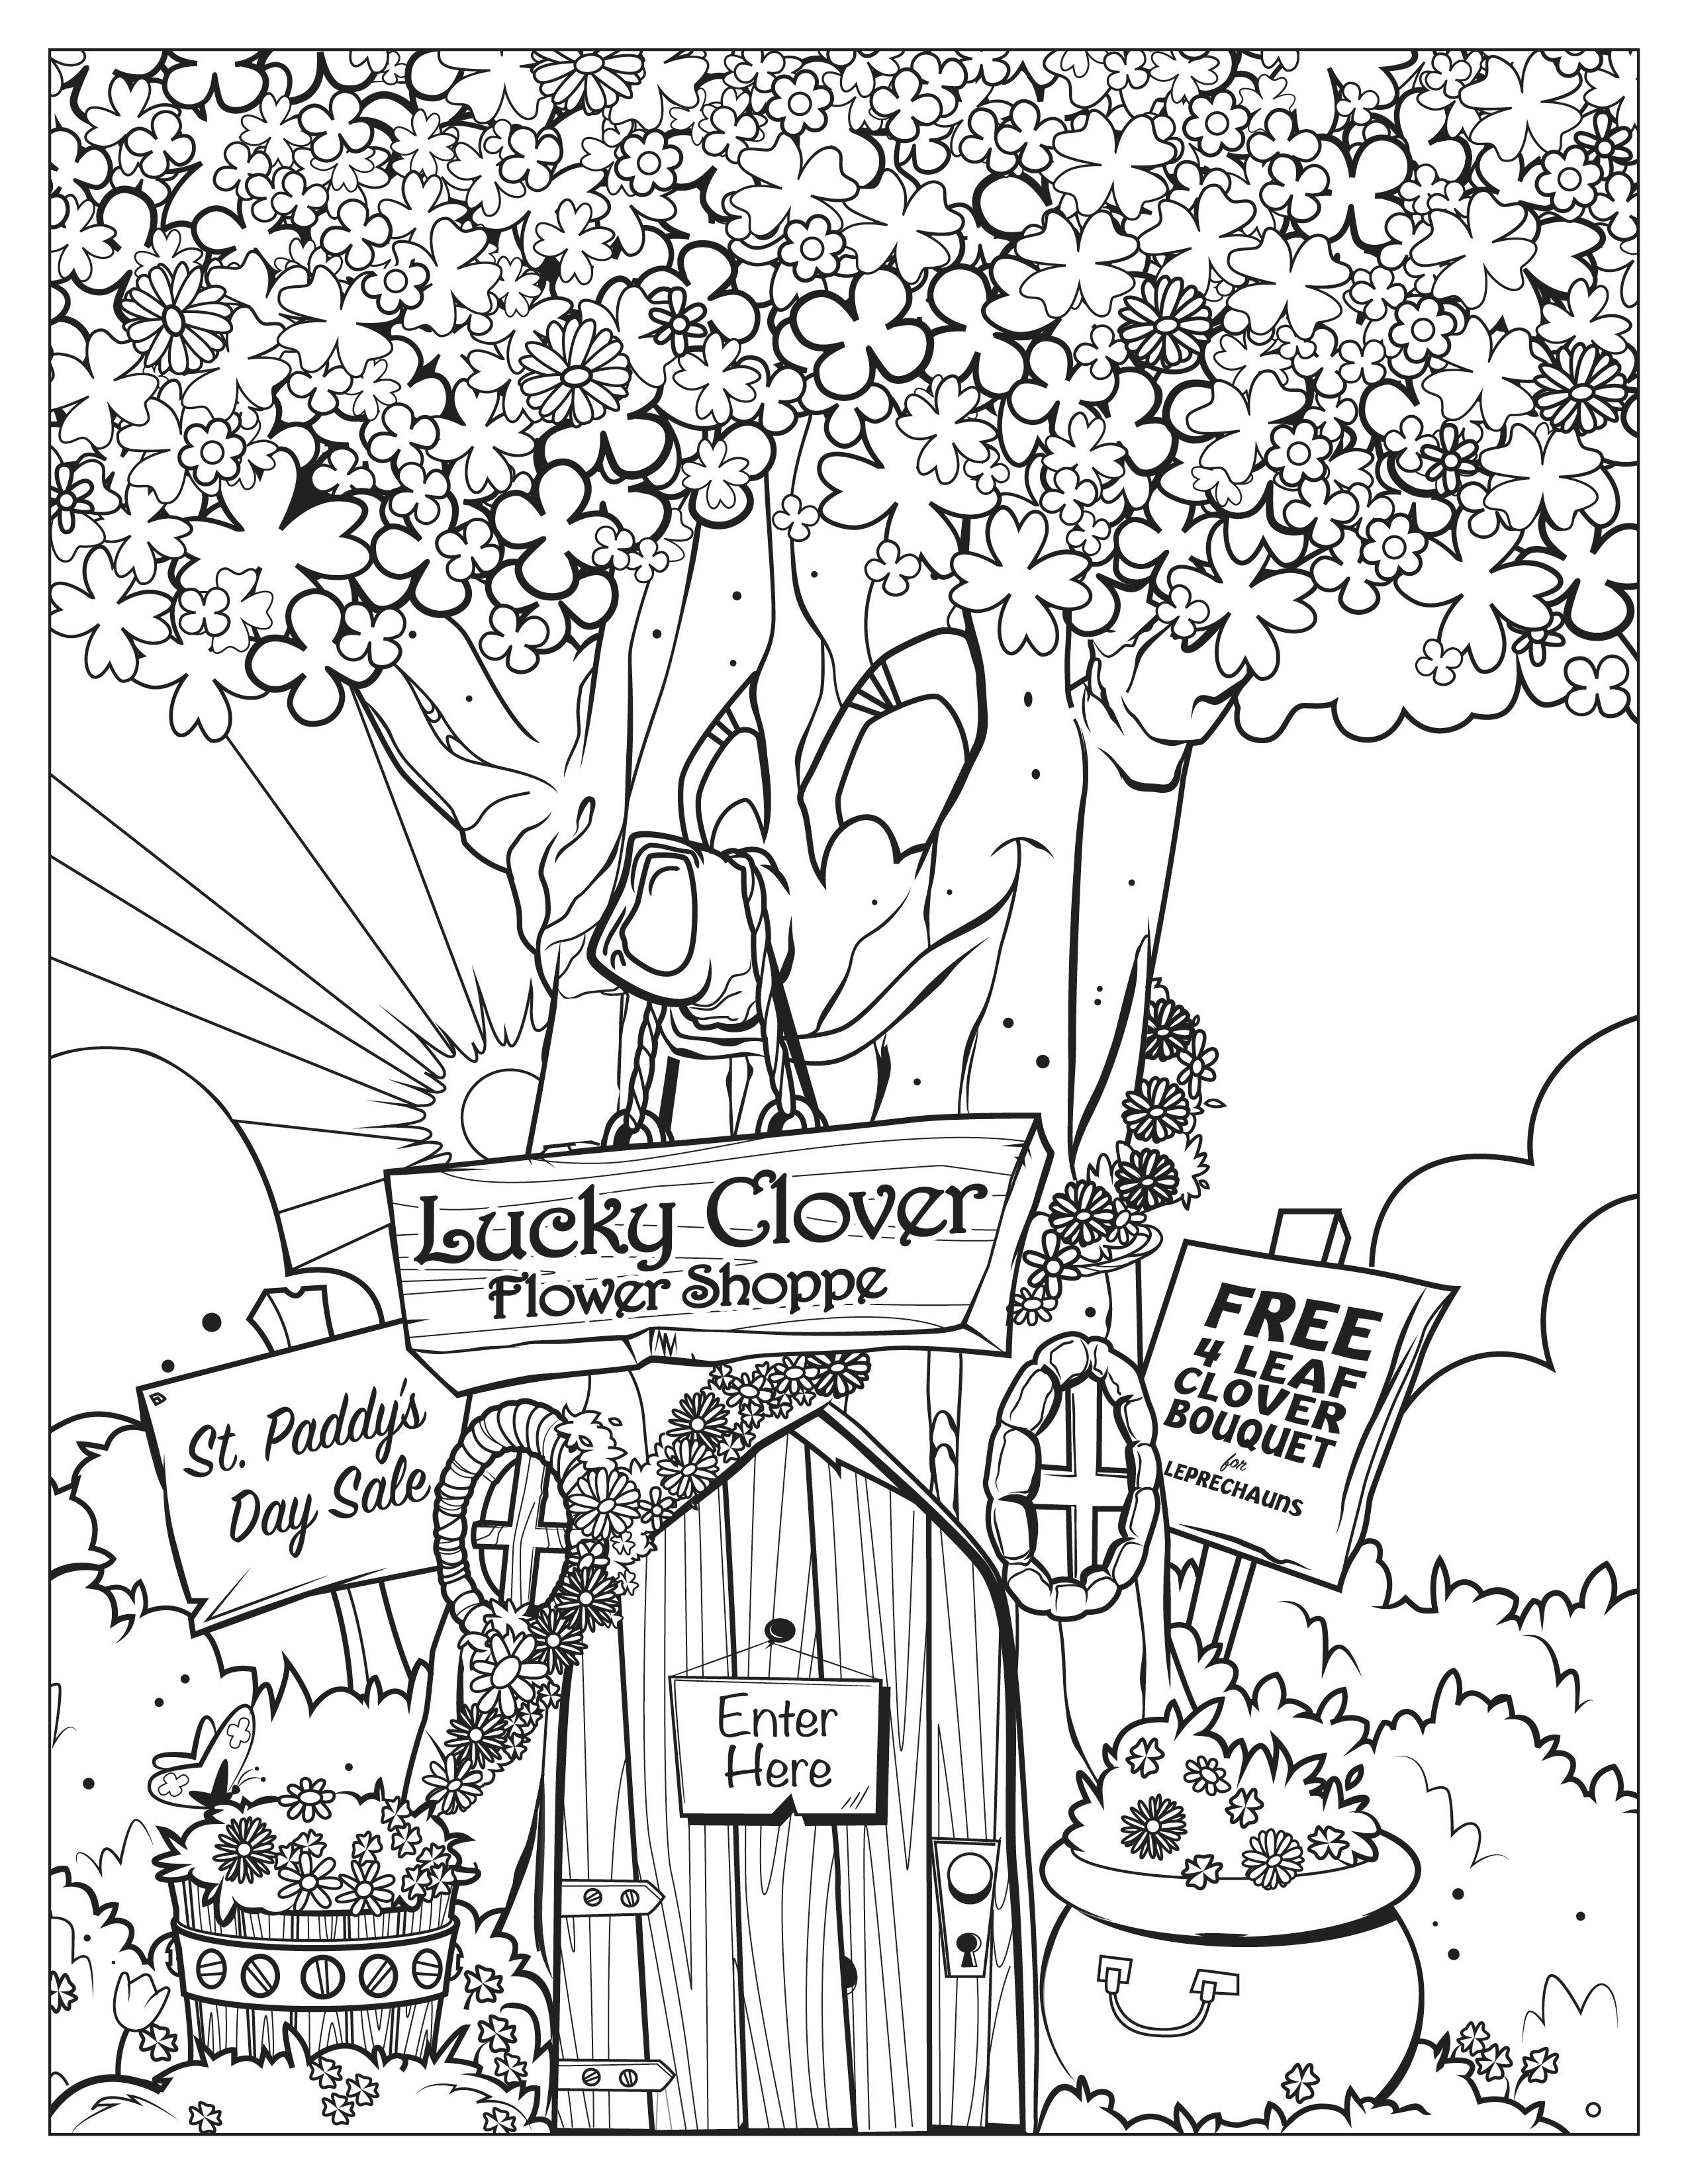 Lucky charms flower shop coloring page coloring pages heart for kids disney crafts